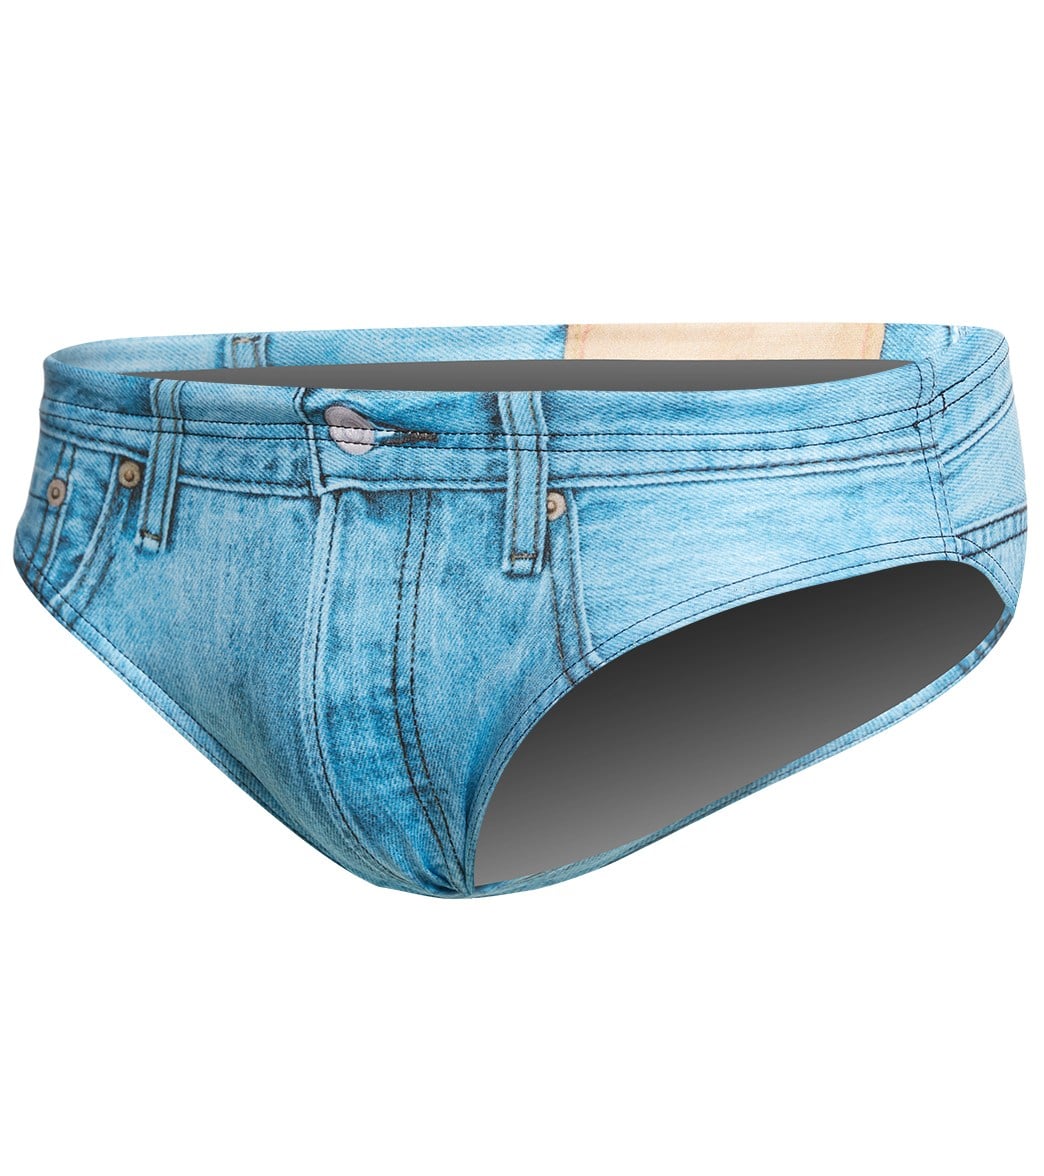 Turbo Men's Jeans Short Water Polo Brief at SwimOutlet.com - Free Shipping